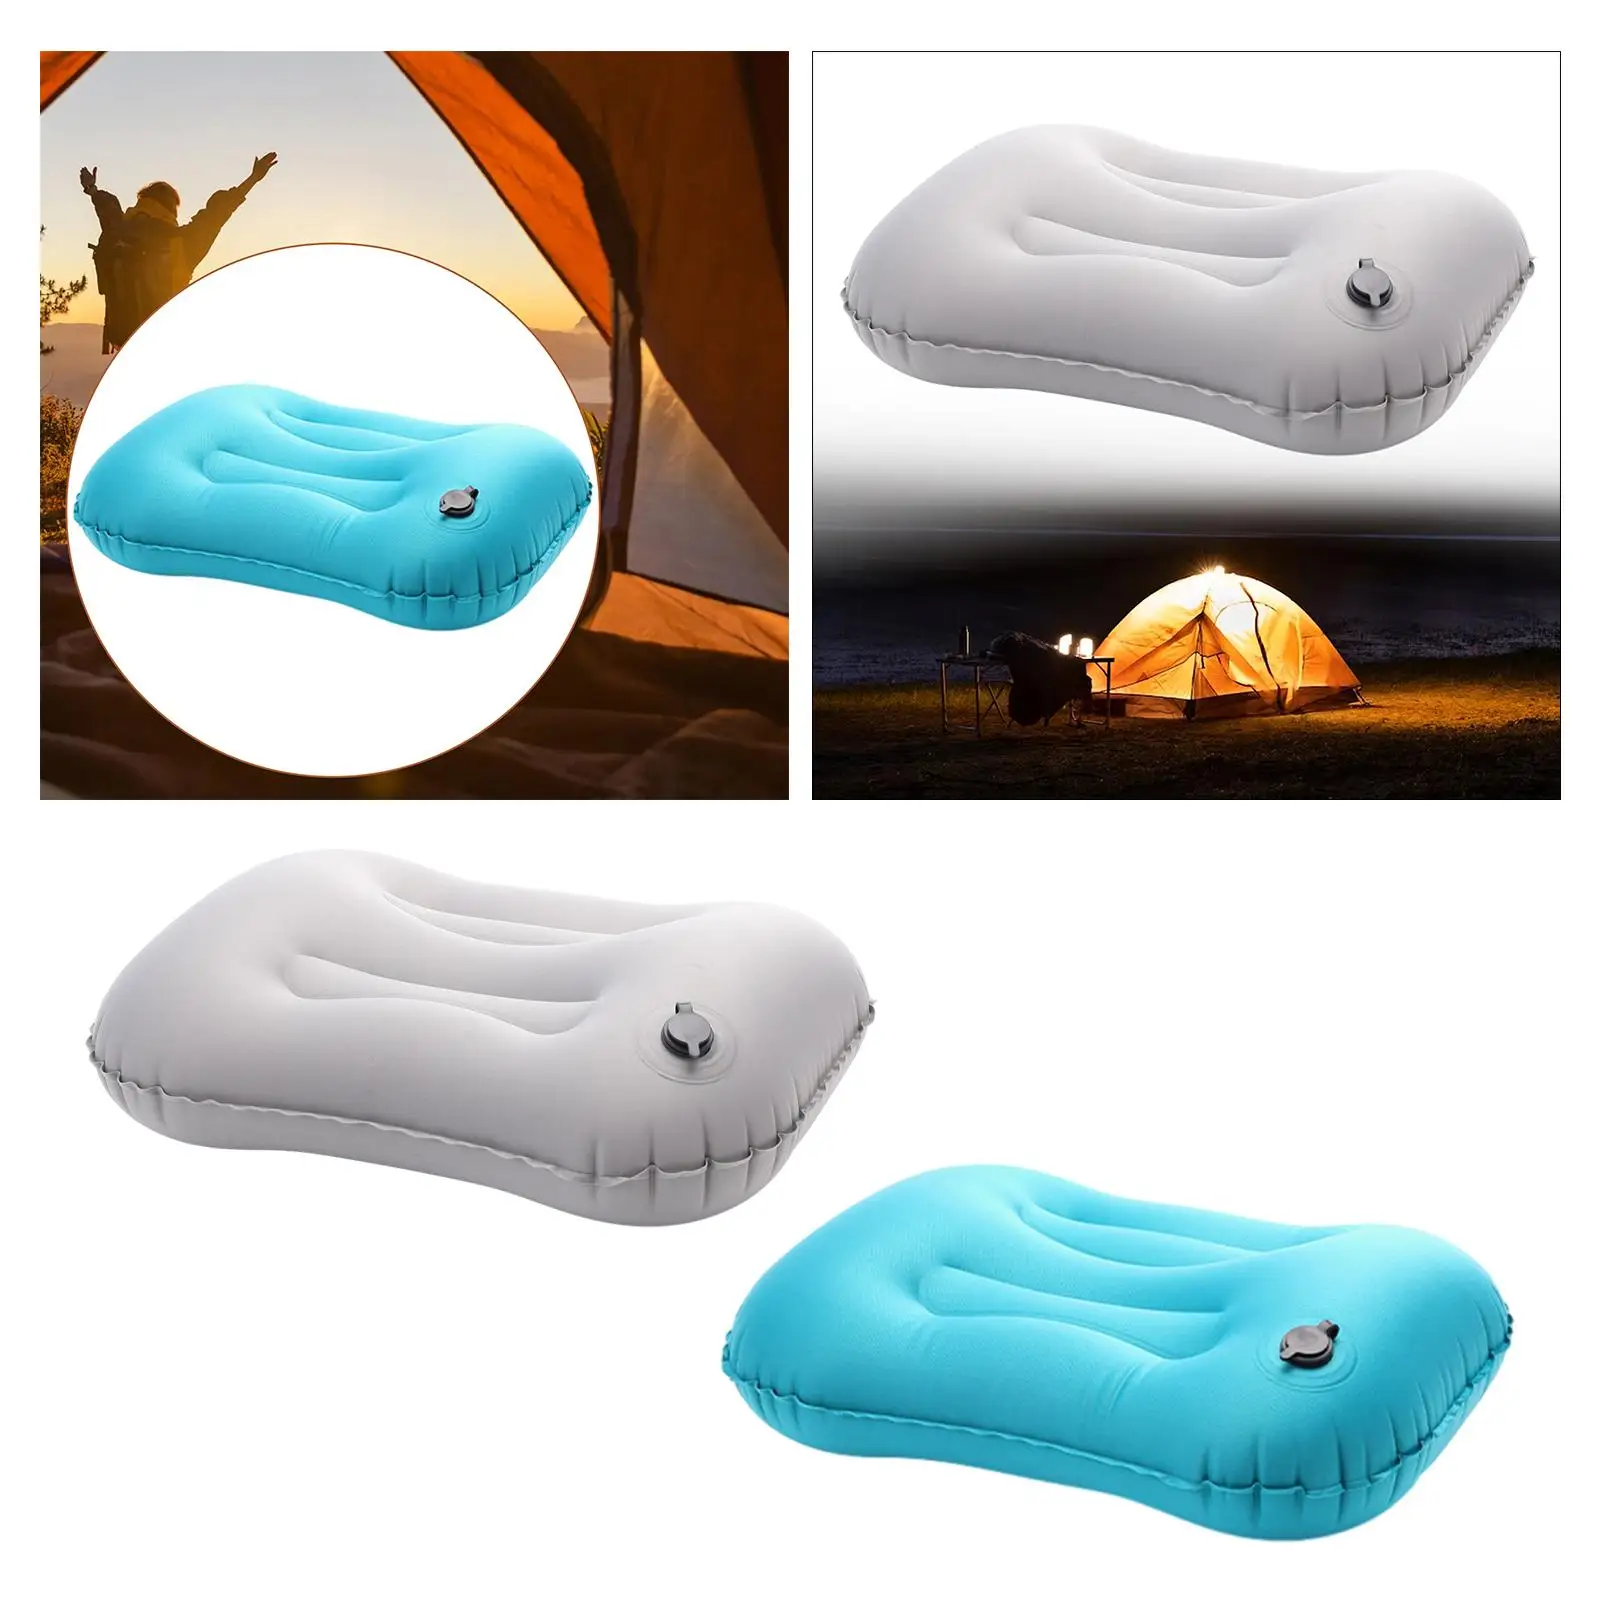 Inflatable Camping Pillow Plane Air Pillow Portable for Neck Support Travel Pillow for Beach Hammock Nap Rest Backpacking Hiking